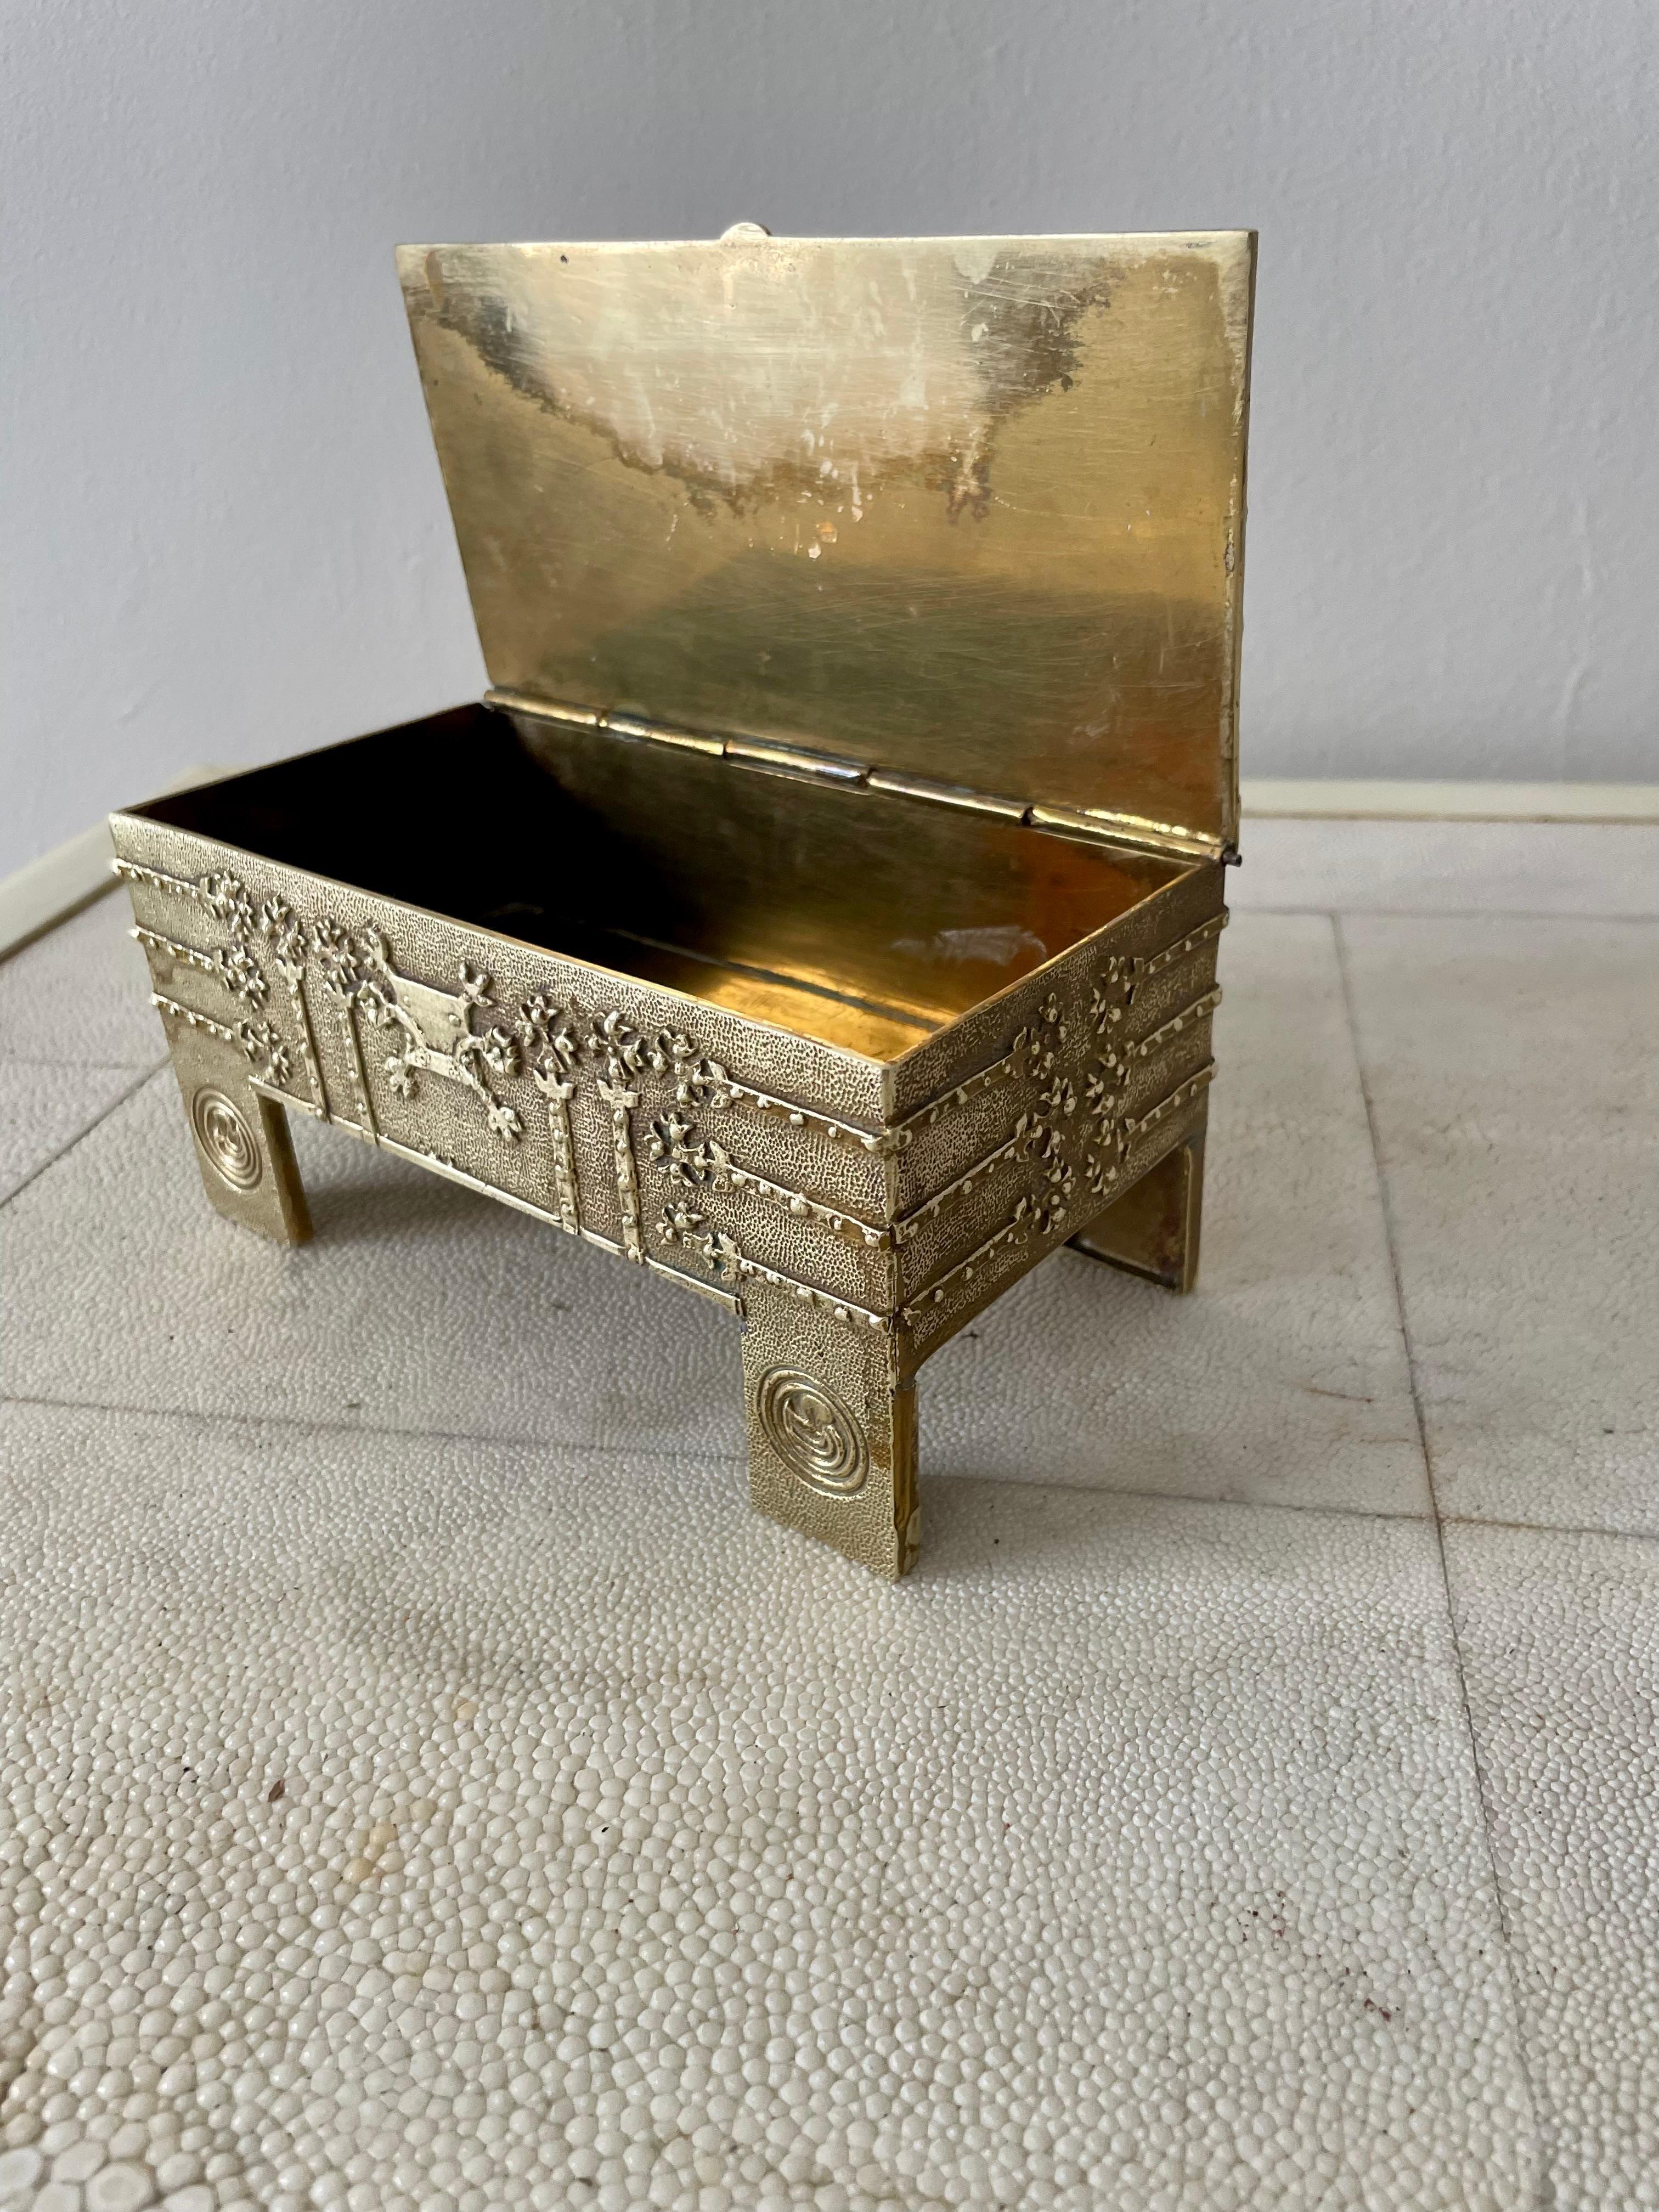 Brutalist Hammered Brass Box or Jewelry Casket For Sale 3